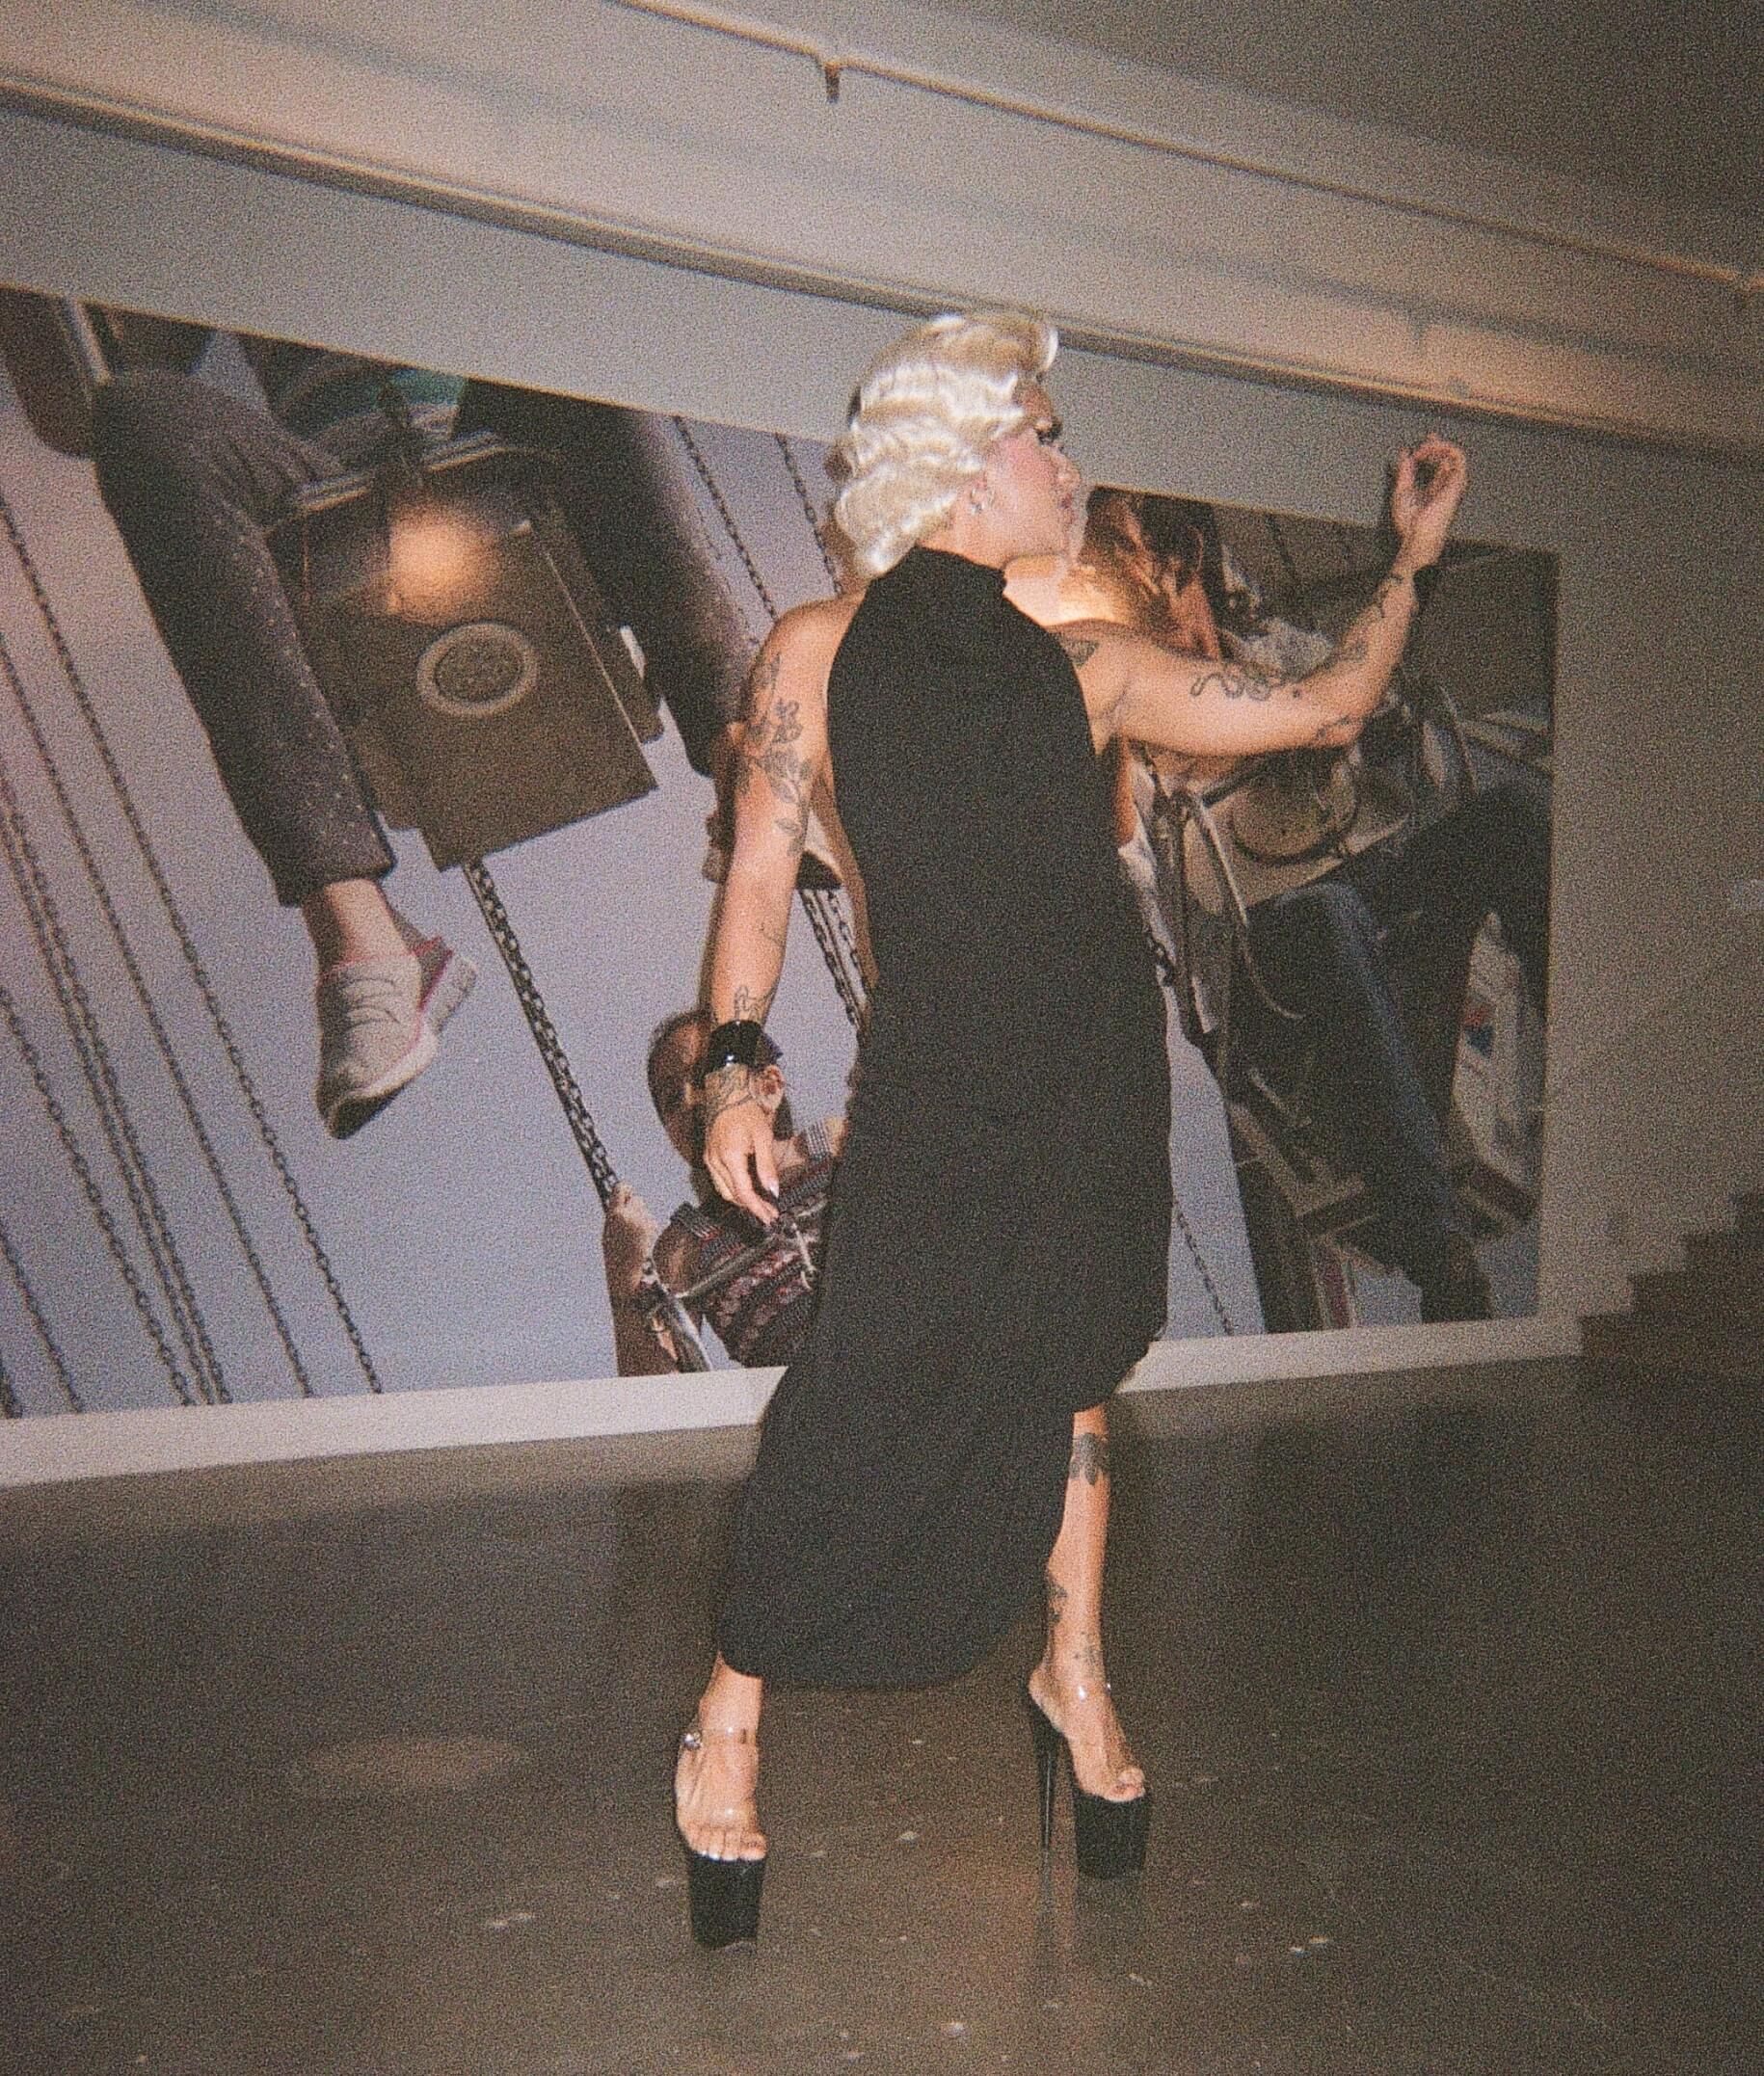 A woman in a black dress performing drag in art gallery.